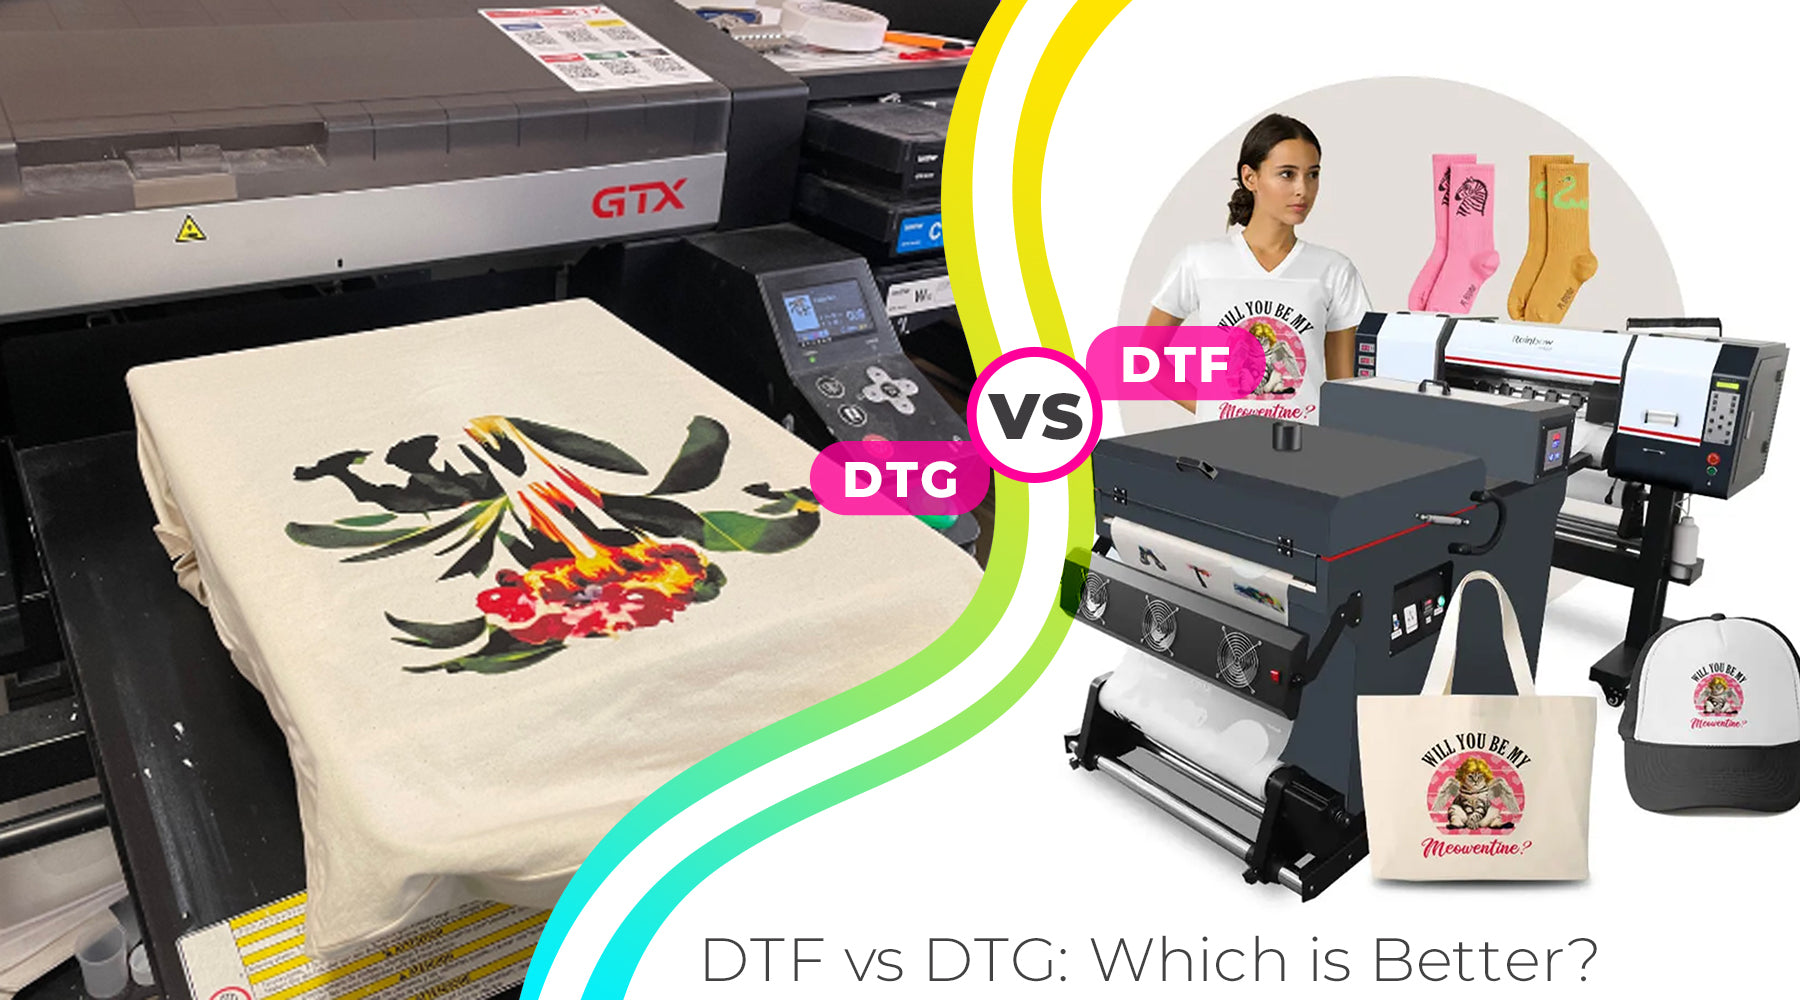 So You Want to Buy A DTG Machine. Read this first.